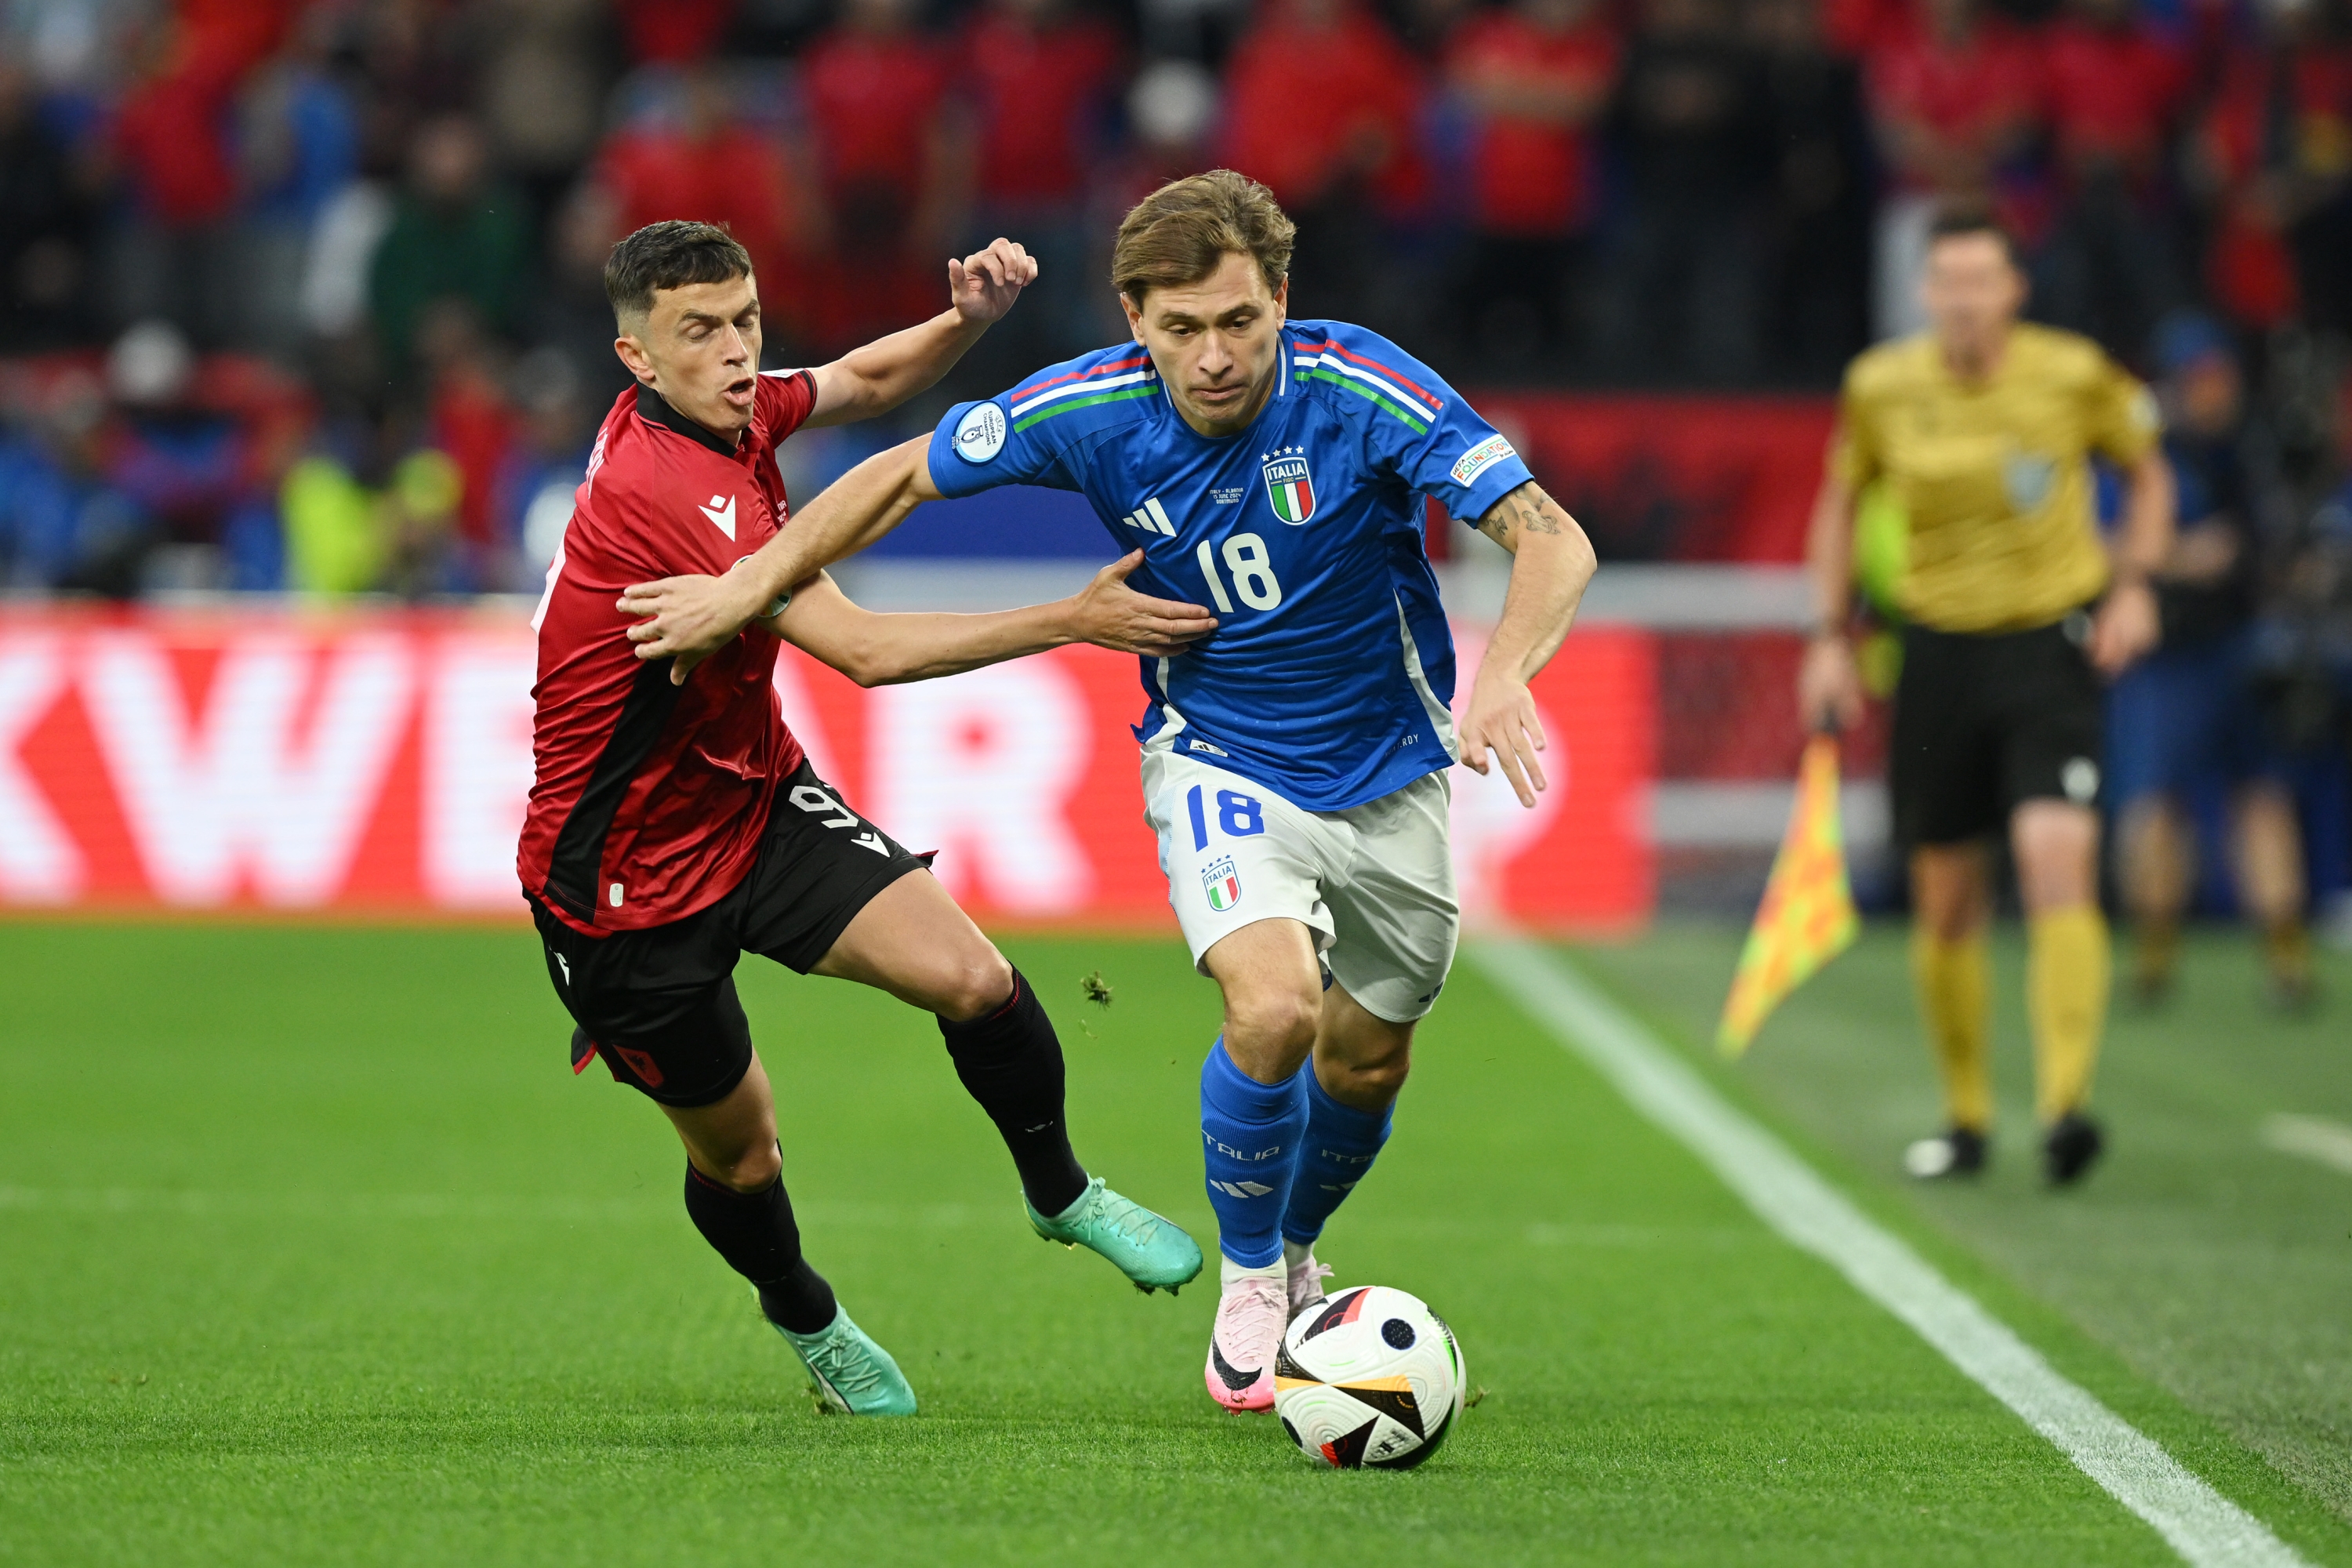 DORTMUND, GERMANY - JUNE 15: Nicolo Barella of Italy runs with the ball whilst under pressure from Jasir Asani of Albania during the UEFA EURO 2024 group stage match between Italy and Albania at Football Stadium Dortmund on June 15, 2024 in Dortmund, Germany. (Photo by Claudio Villa/Getty Images for FIGC)